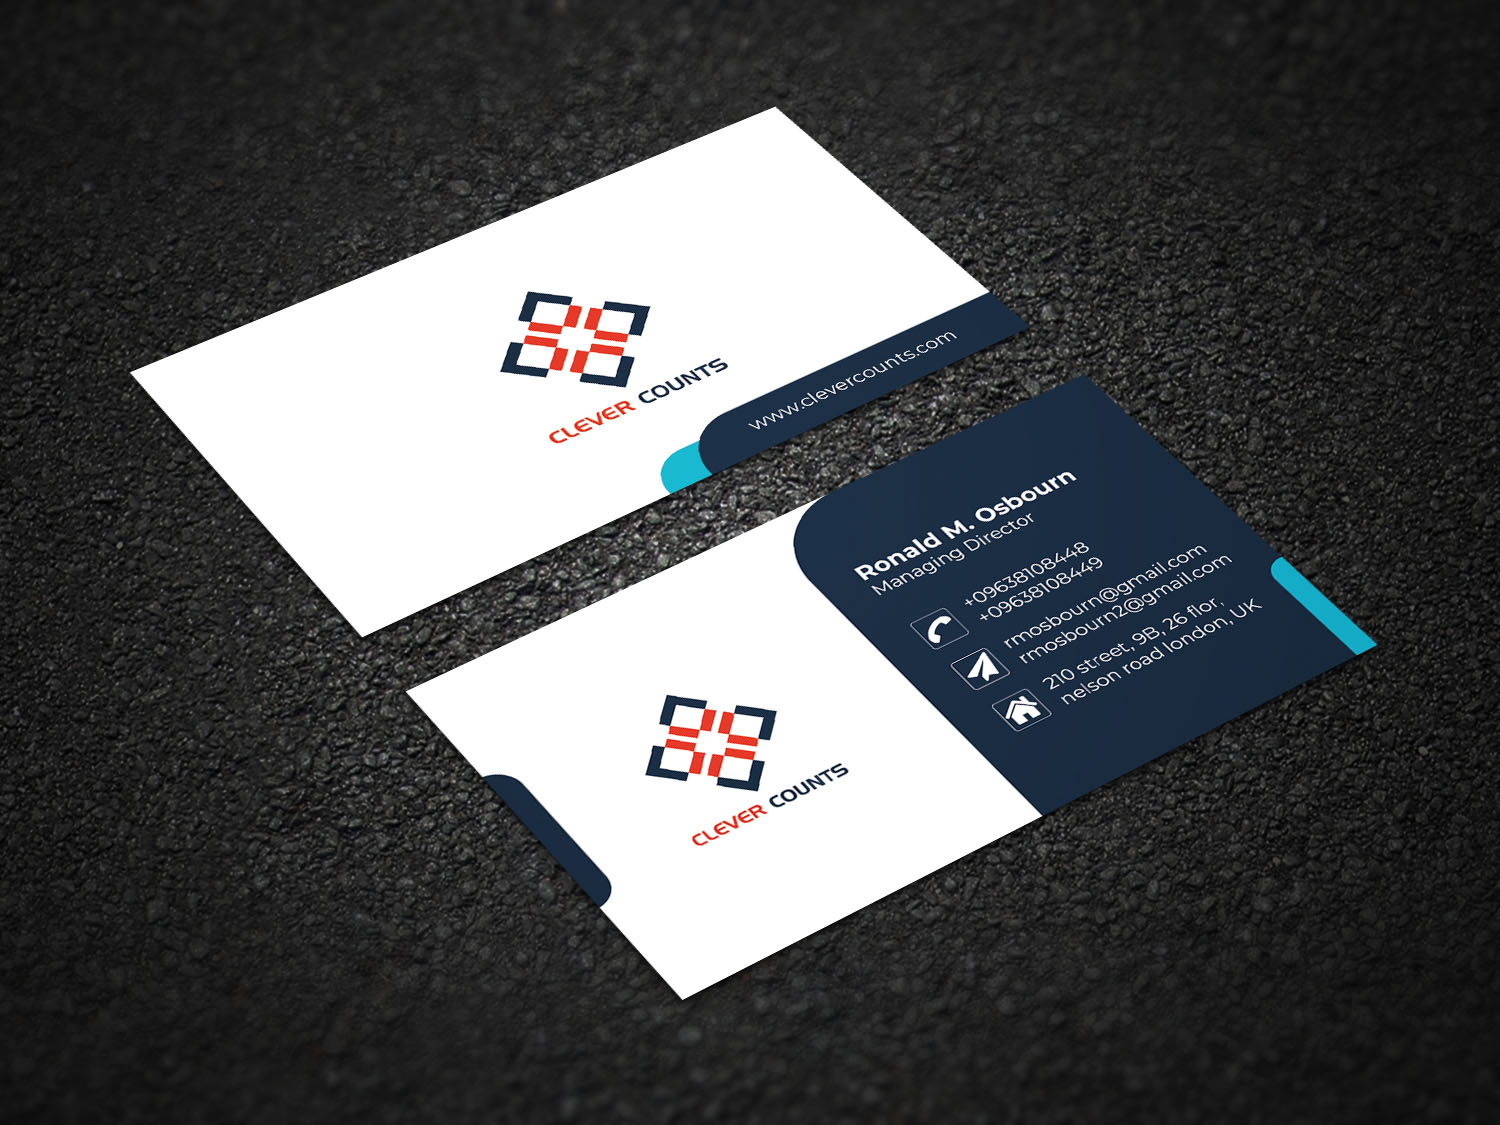 I will do corporate minimalist business card design within 24 hours